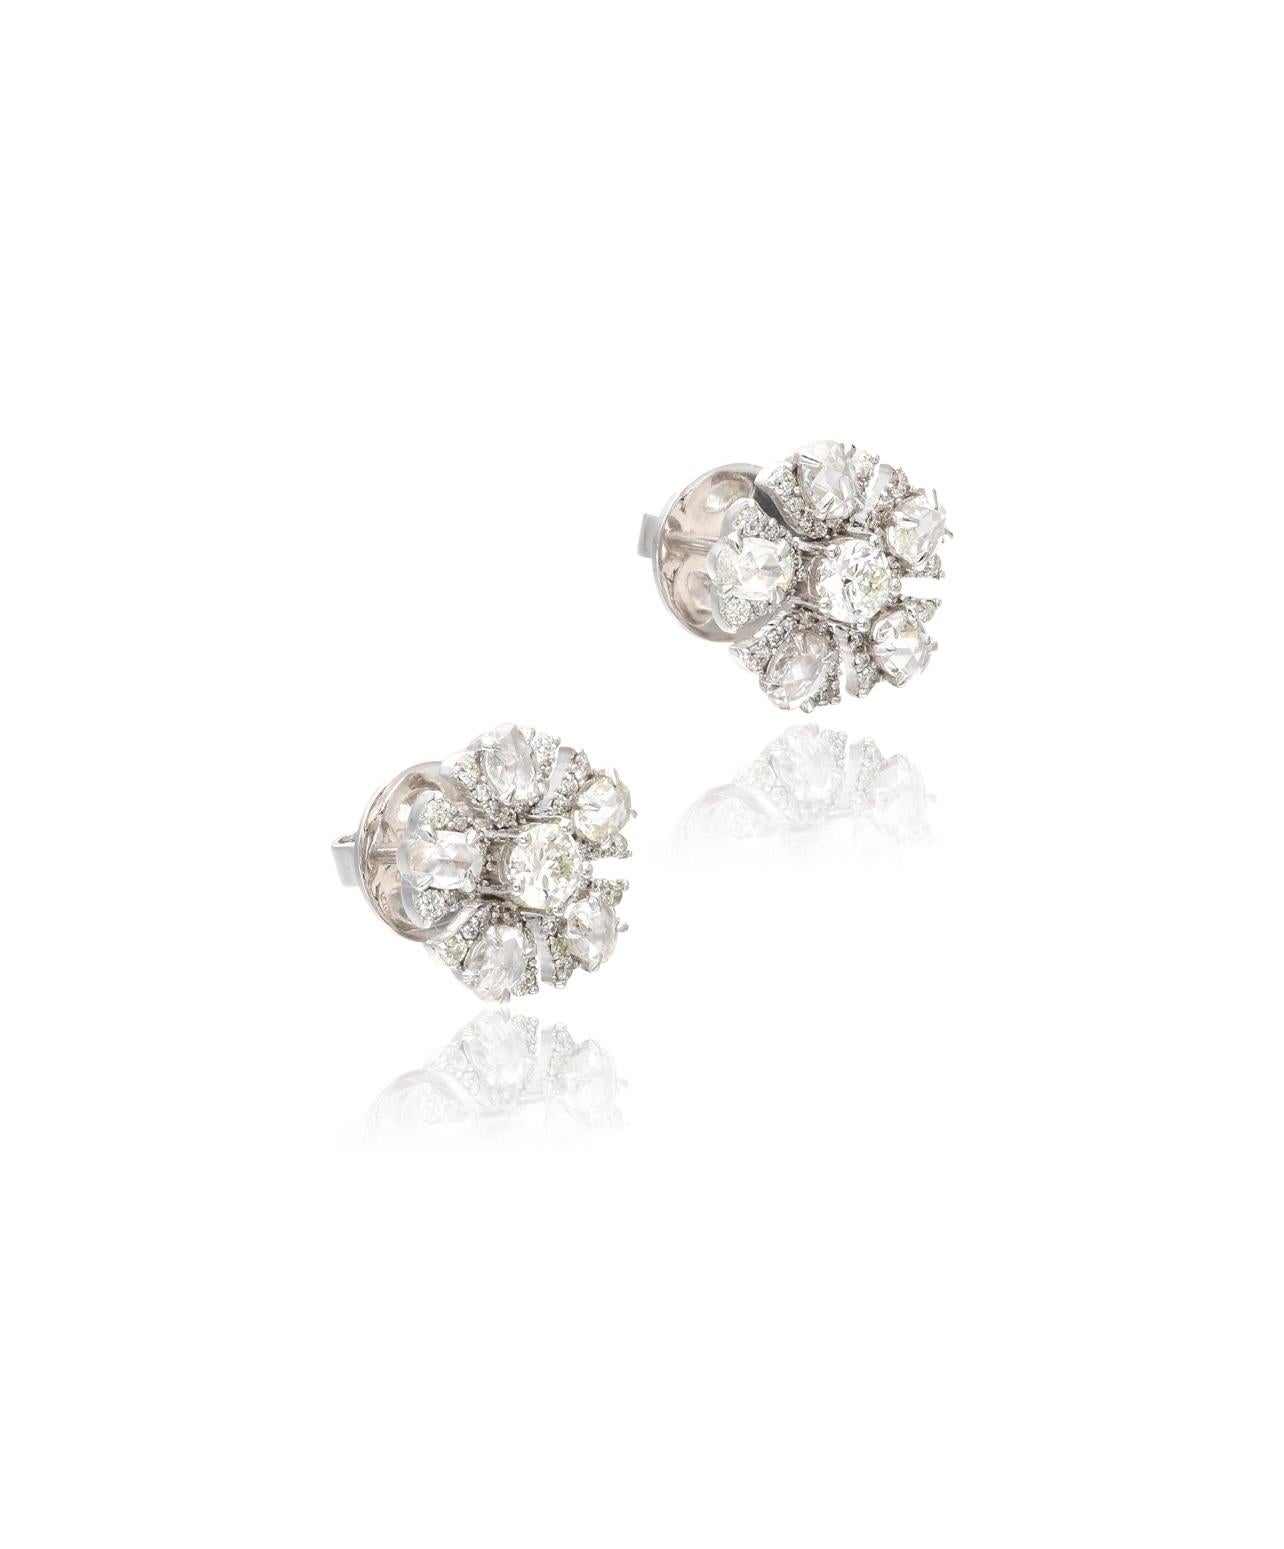 Very pretty Tulip shaped rose cut diamond and round brilliant diamond stud earrings in 18k gold.
Set with 10 rose cut diamonds, accented by 82 round brilliant diamonds.
The details are as follows :
Diamond weight : 1.10 carats ( 0.63 + 0.47) GH